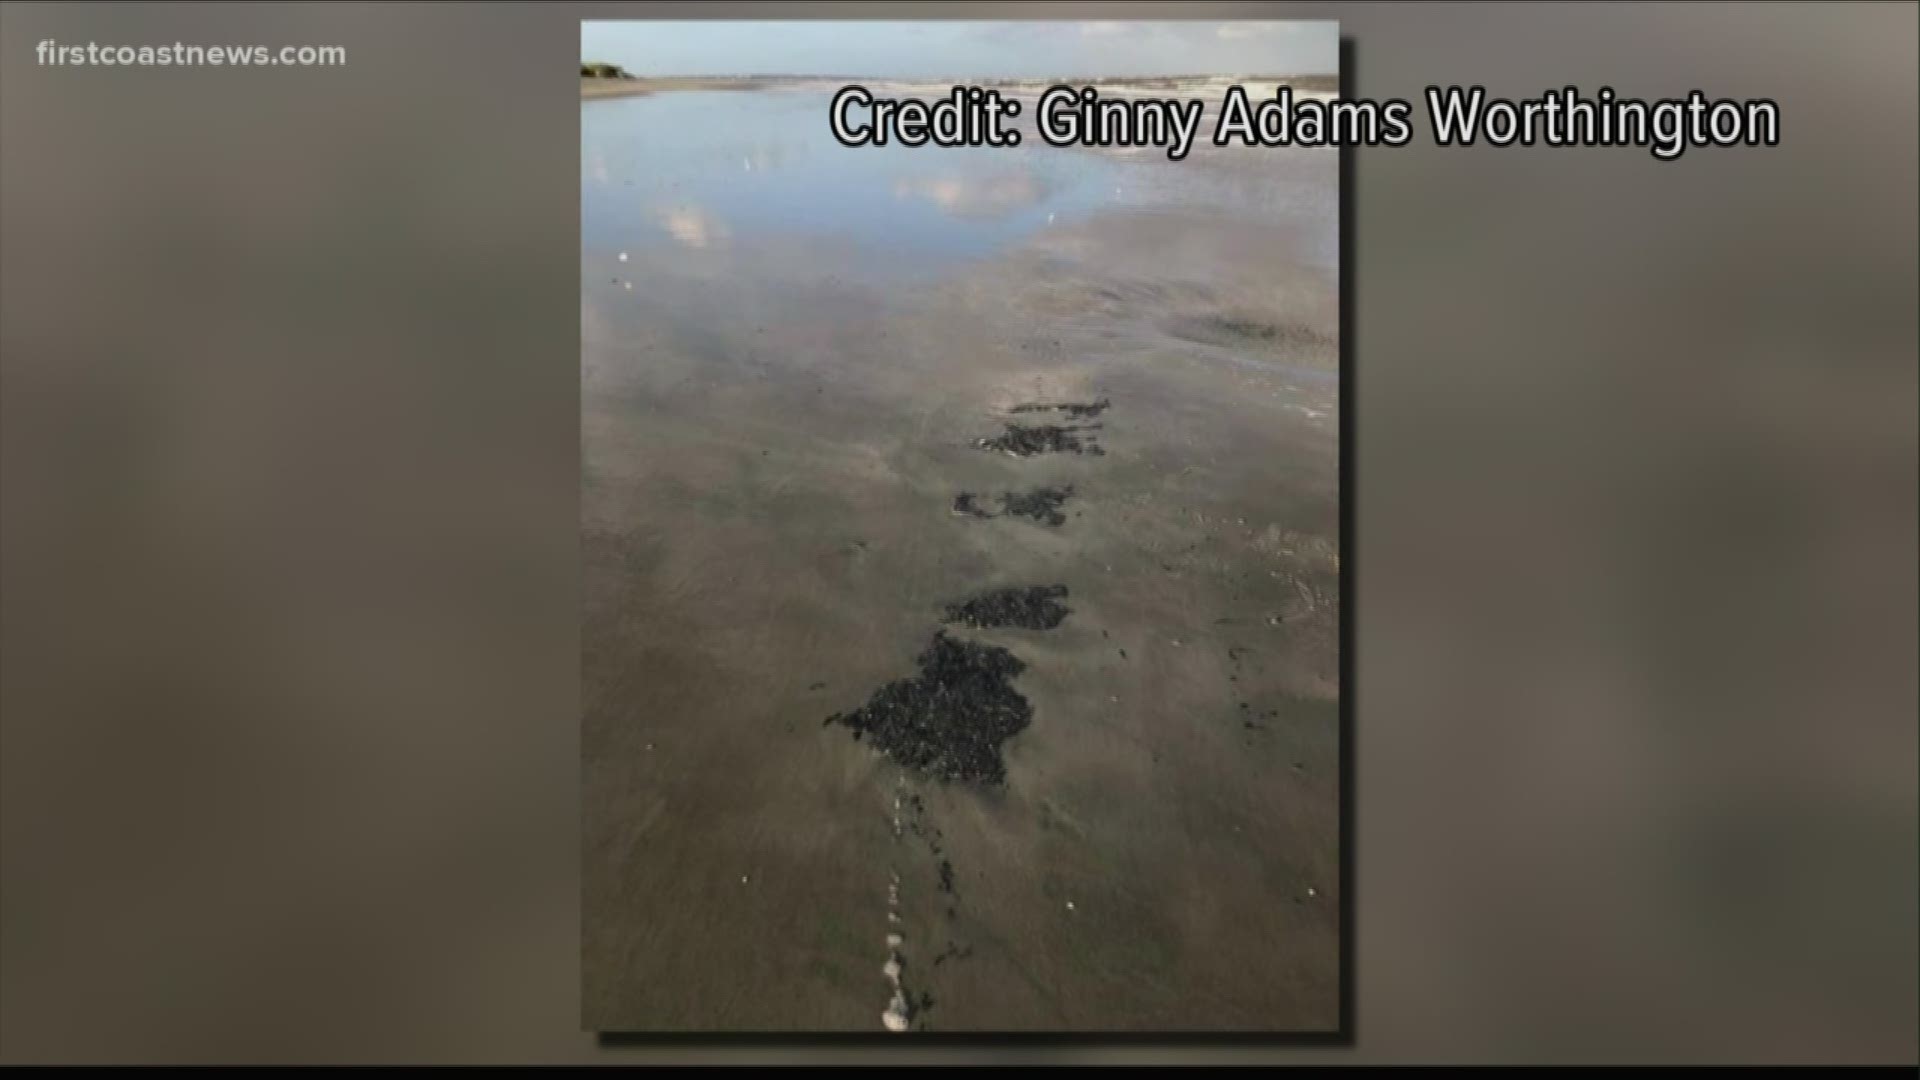 A First Coast News viewer says they captured oiling on Saint Simons shores between East Beach and Gould's Inlet.